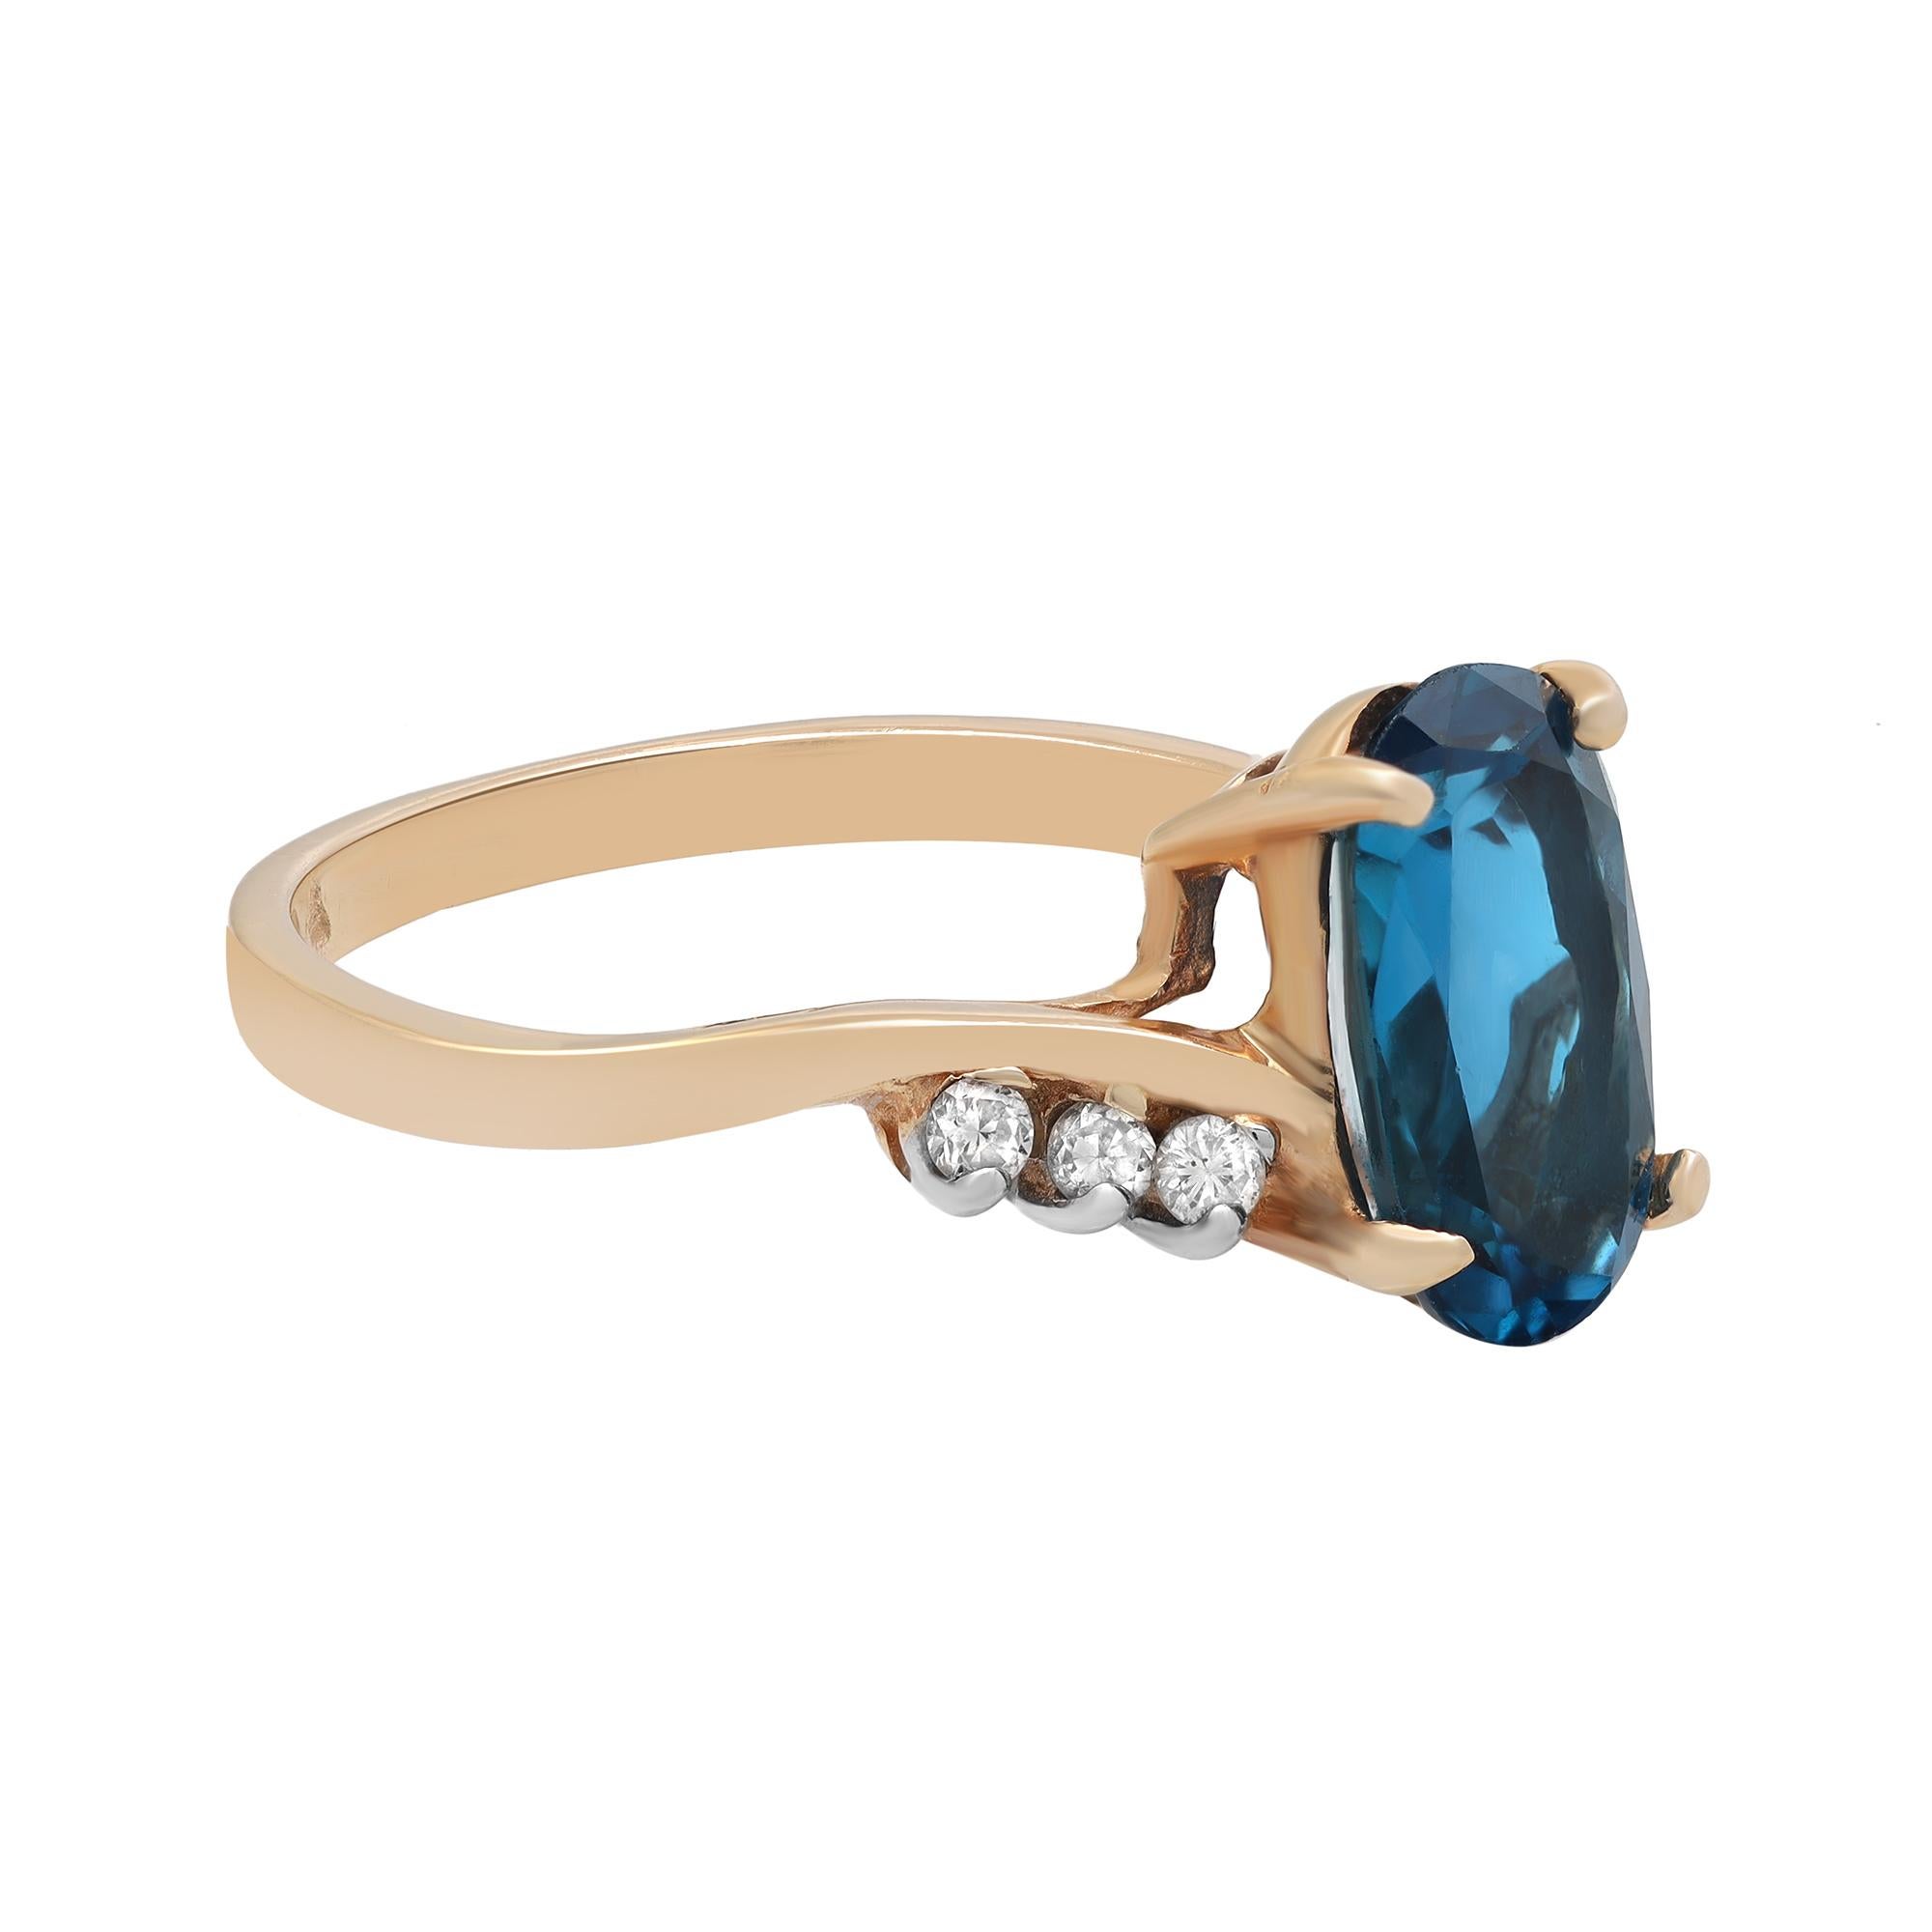 Oval Cut London Blue Topaz And Diamond Ladies Ring 14k Yellow Gold 1.73Cttw For Sale